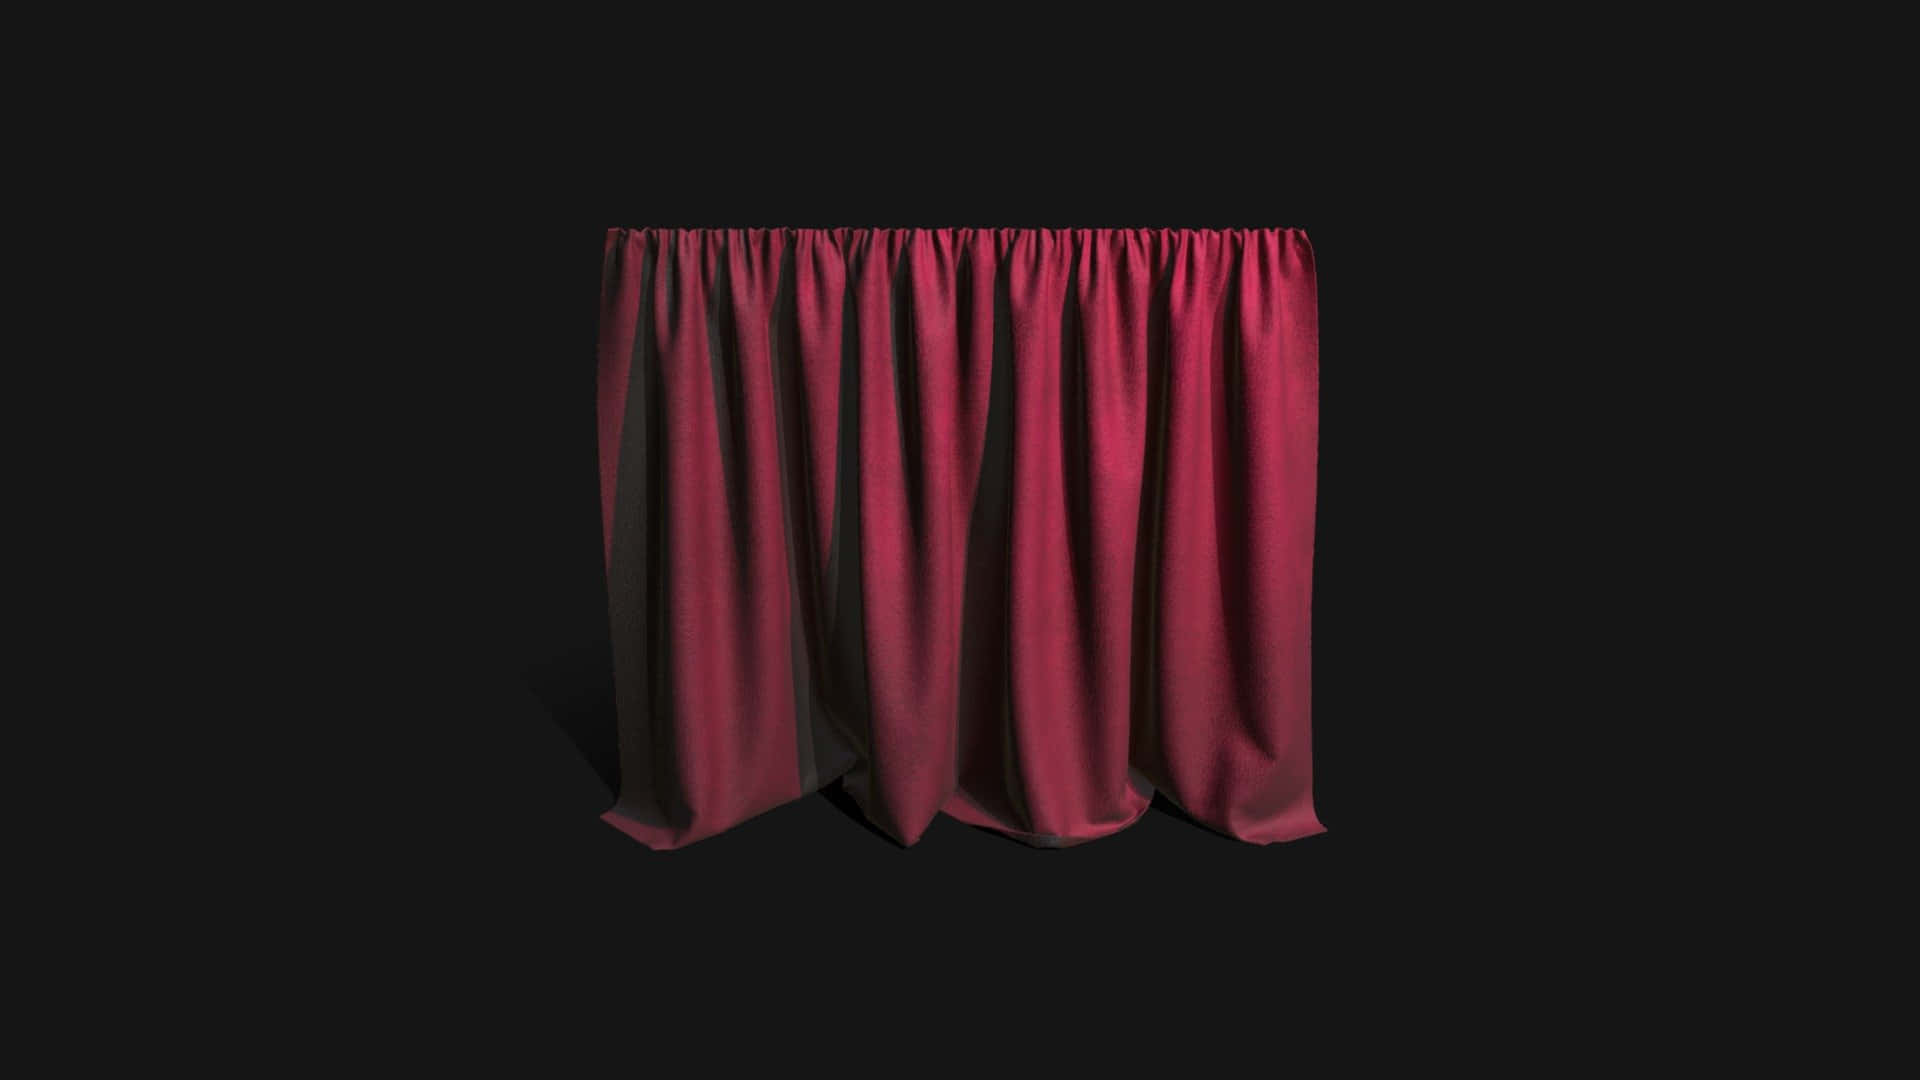 Dark Red Curtain opening onto a dramatic scene